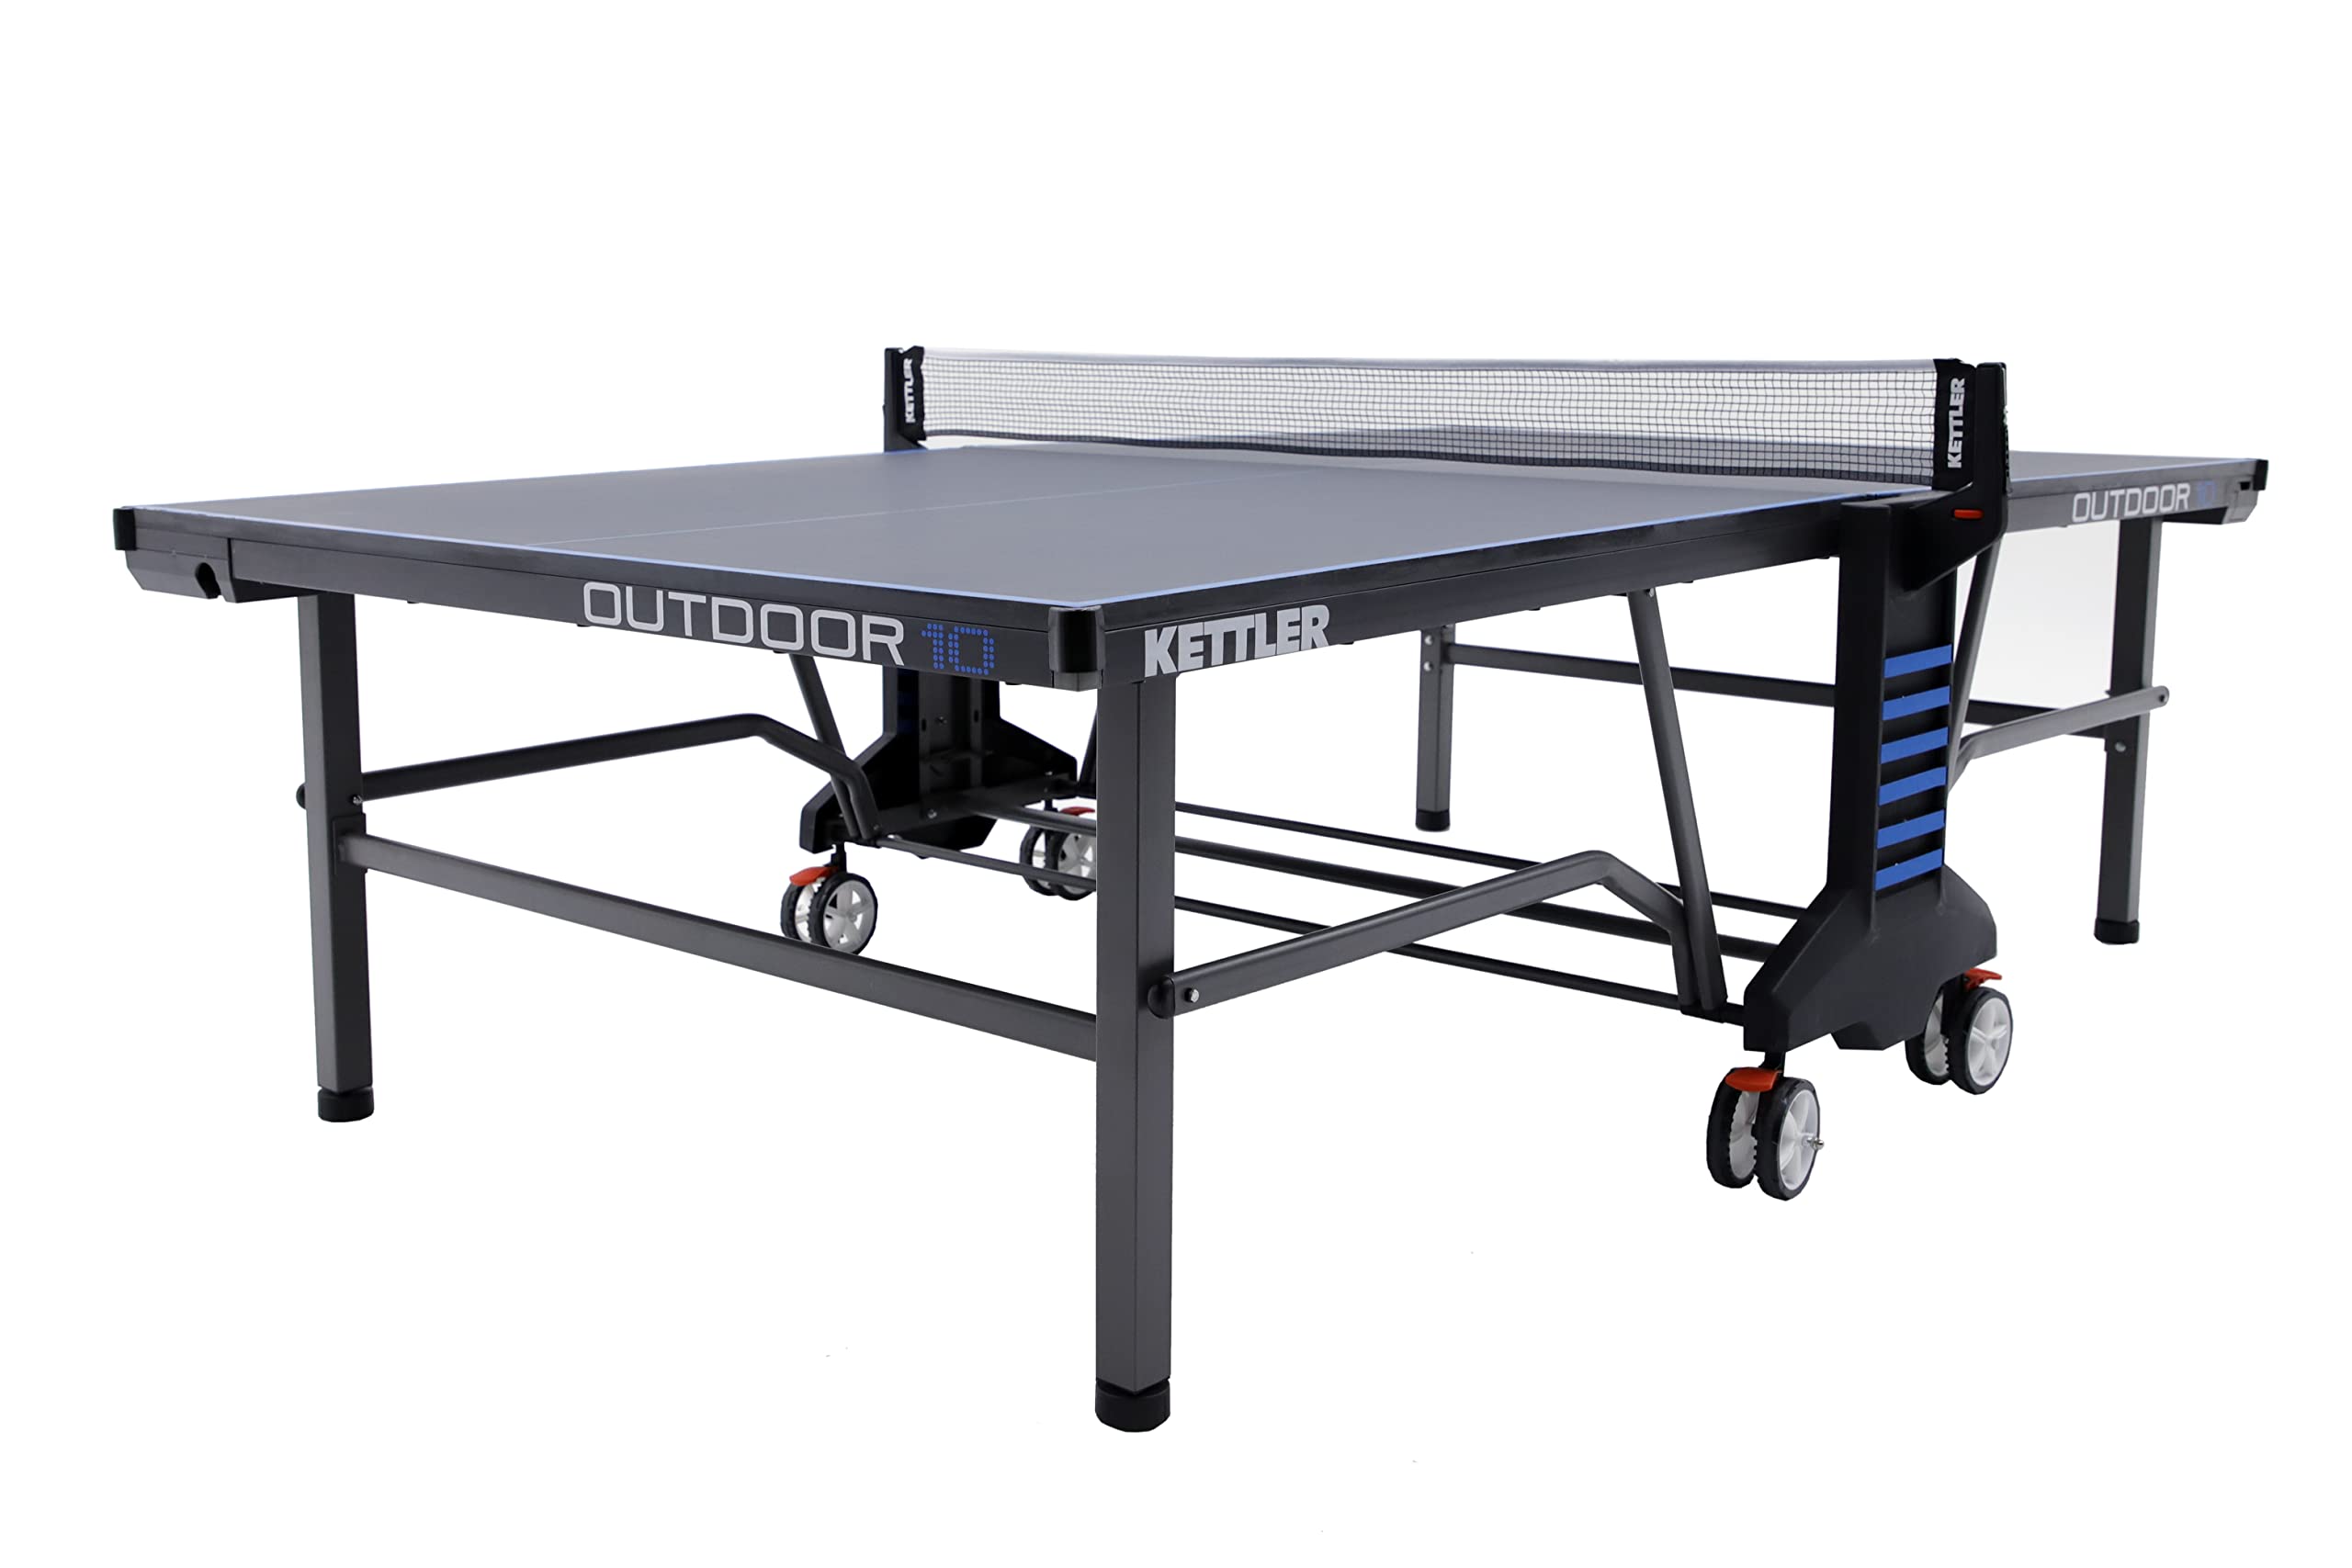 KETTLER Outdoor 10 Table Tennis Table 4-Player Bundle